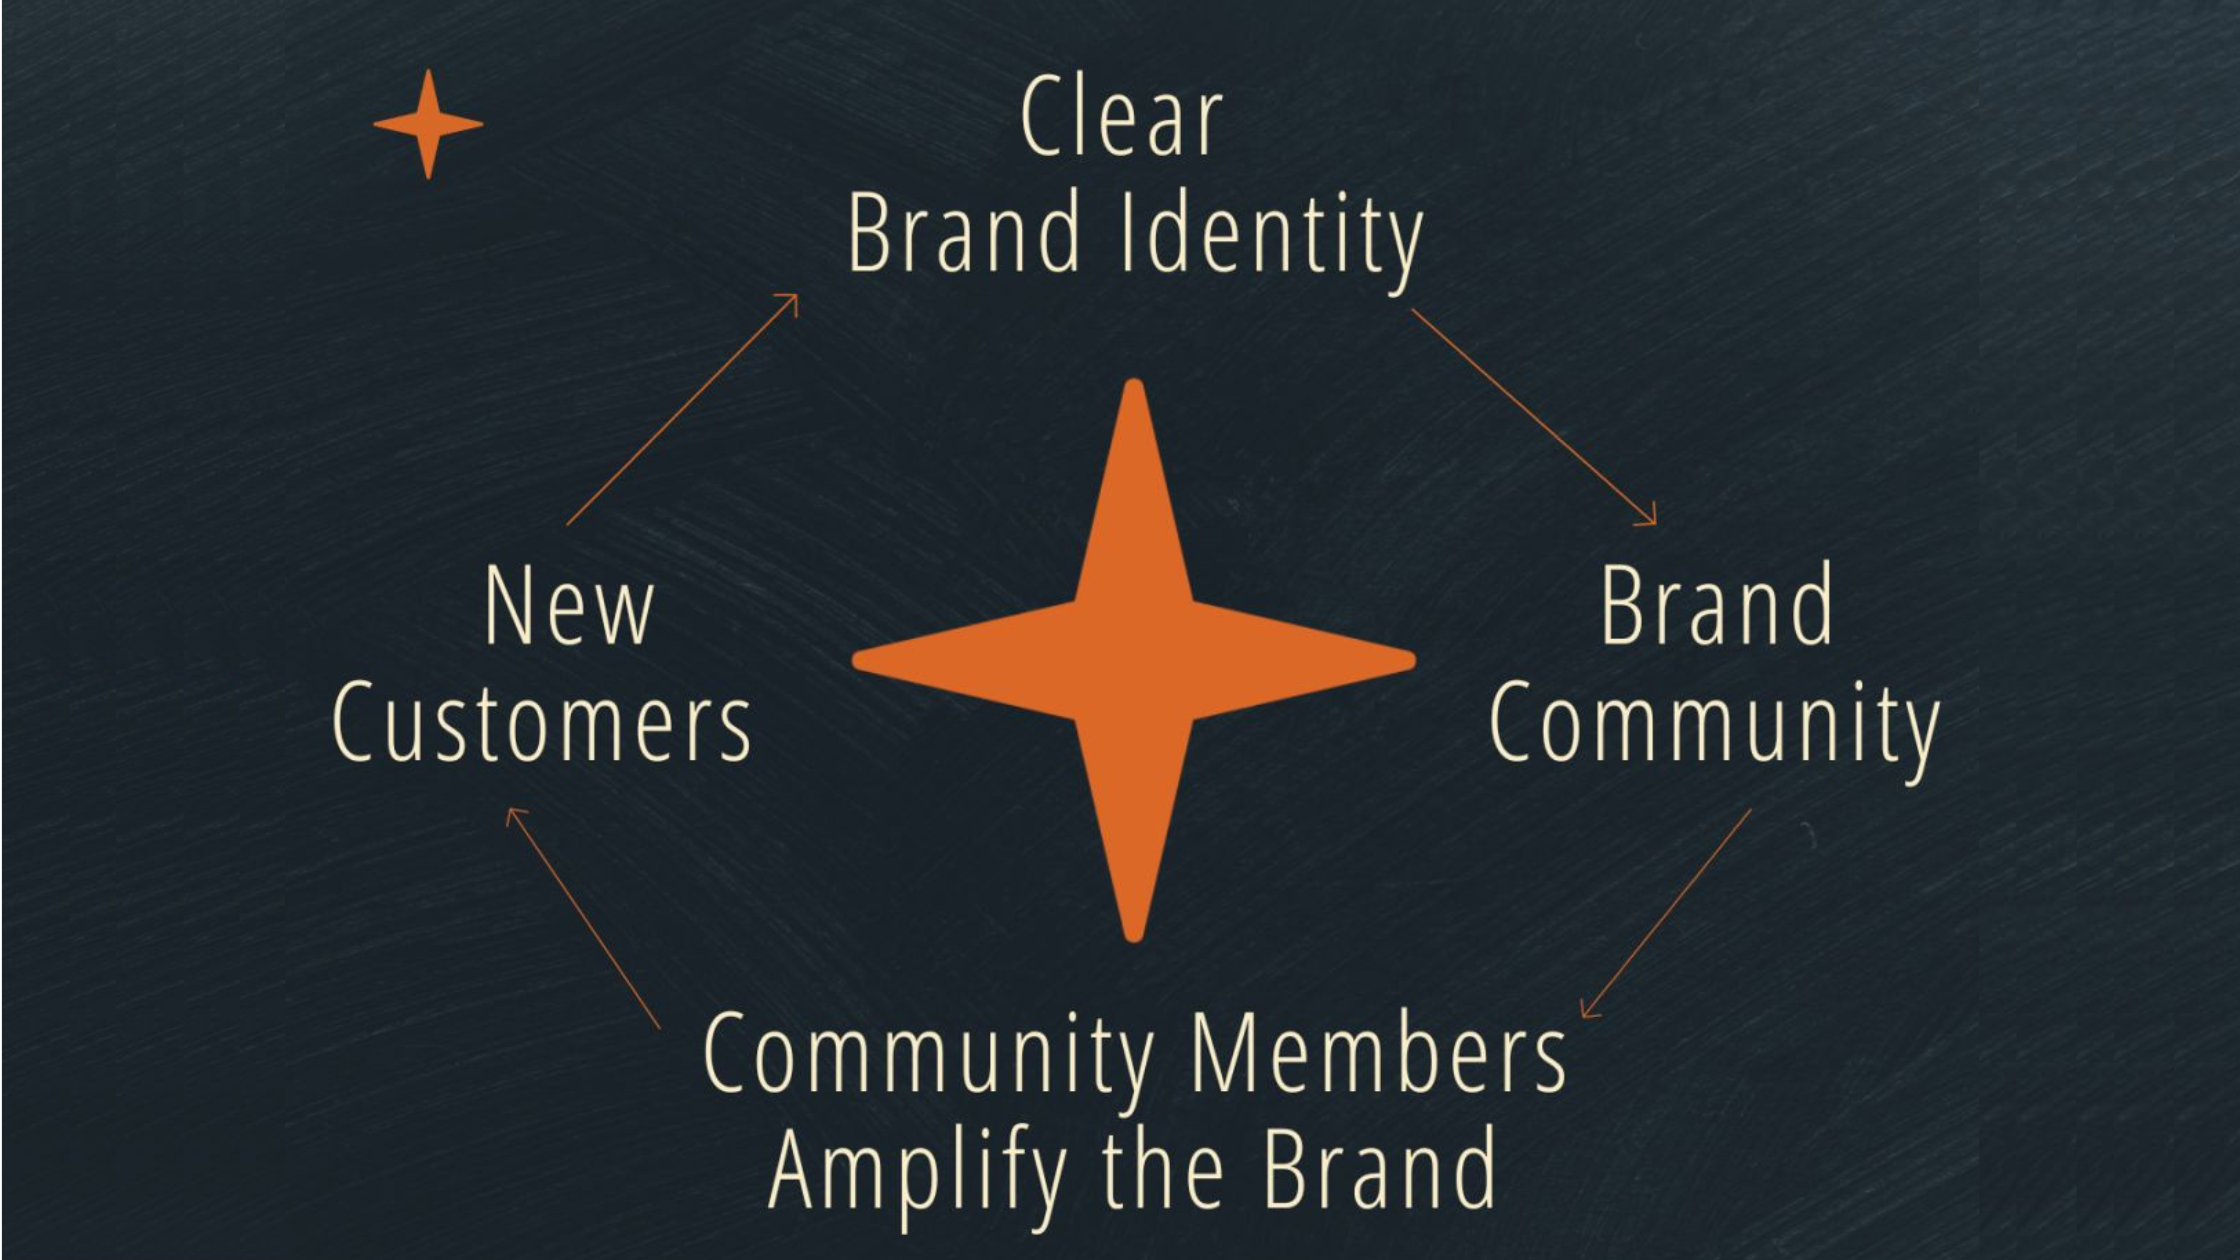 From “Direct to Consumer” to “Direct to Community”